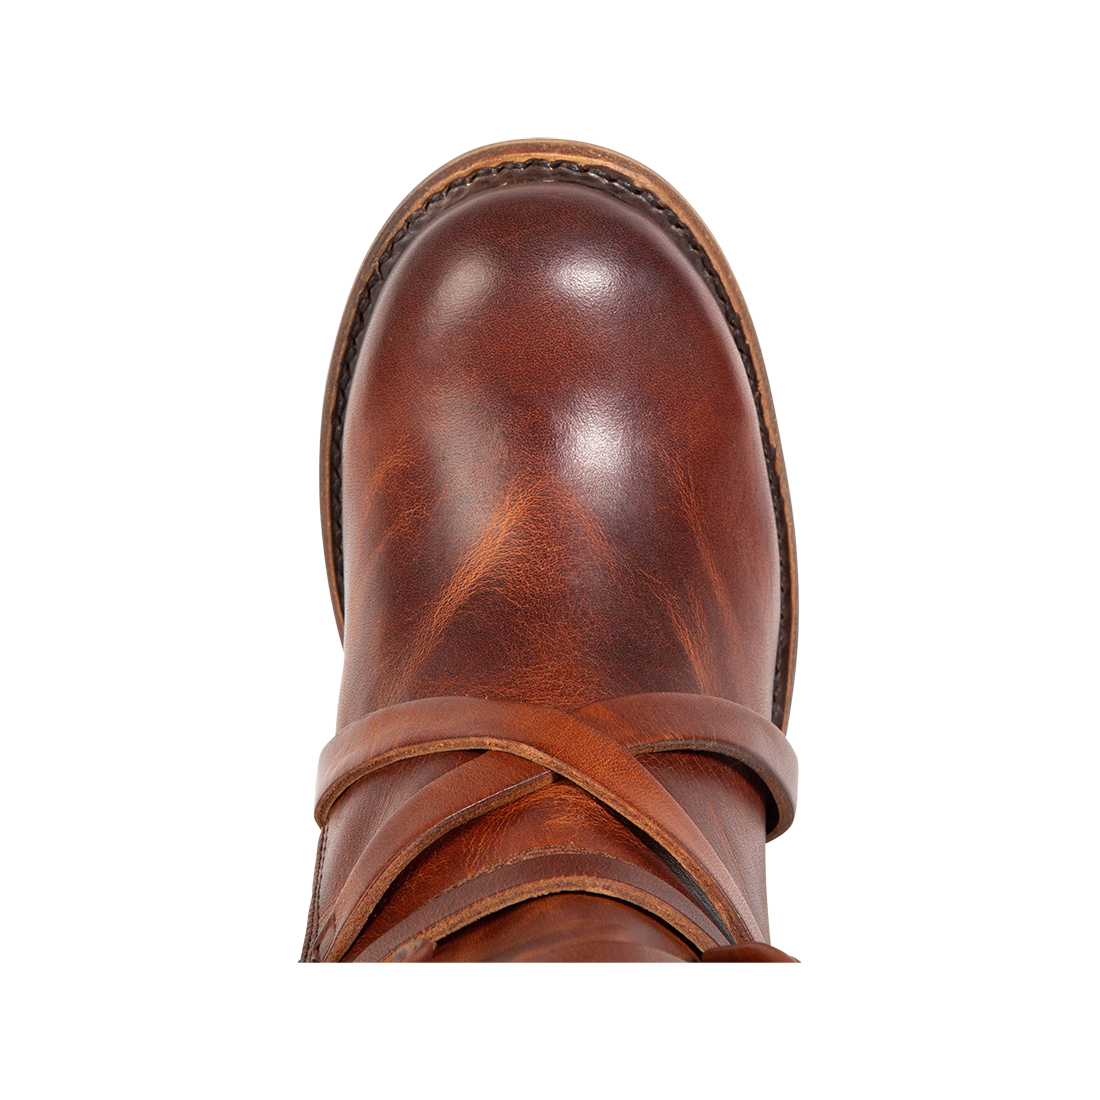 Top view showing round toe and leather ankle straps on FREEBIRD women's Baker cognac boot